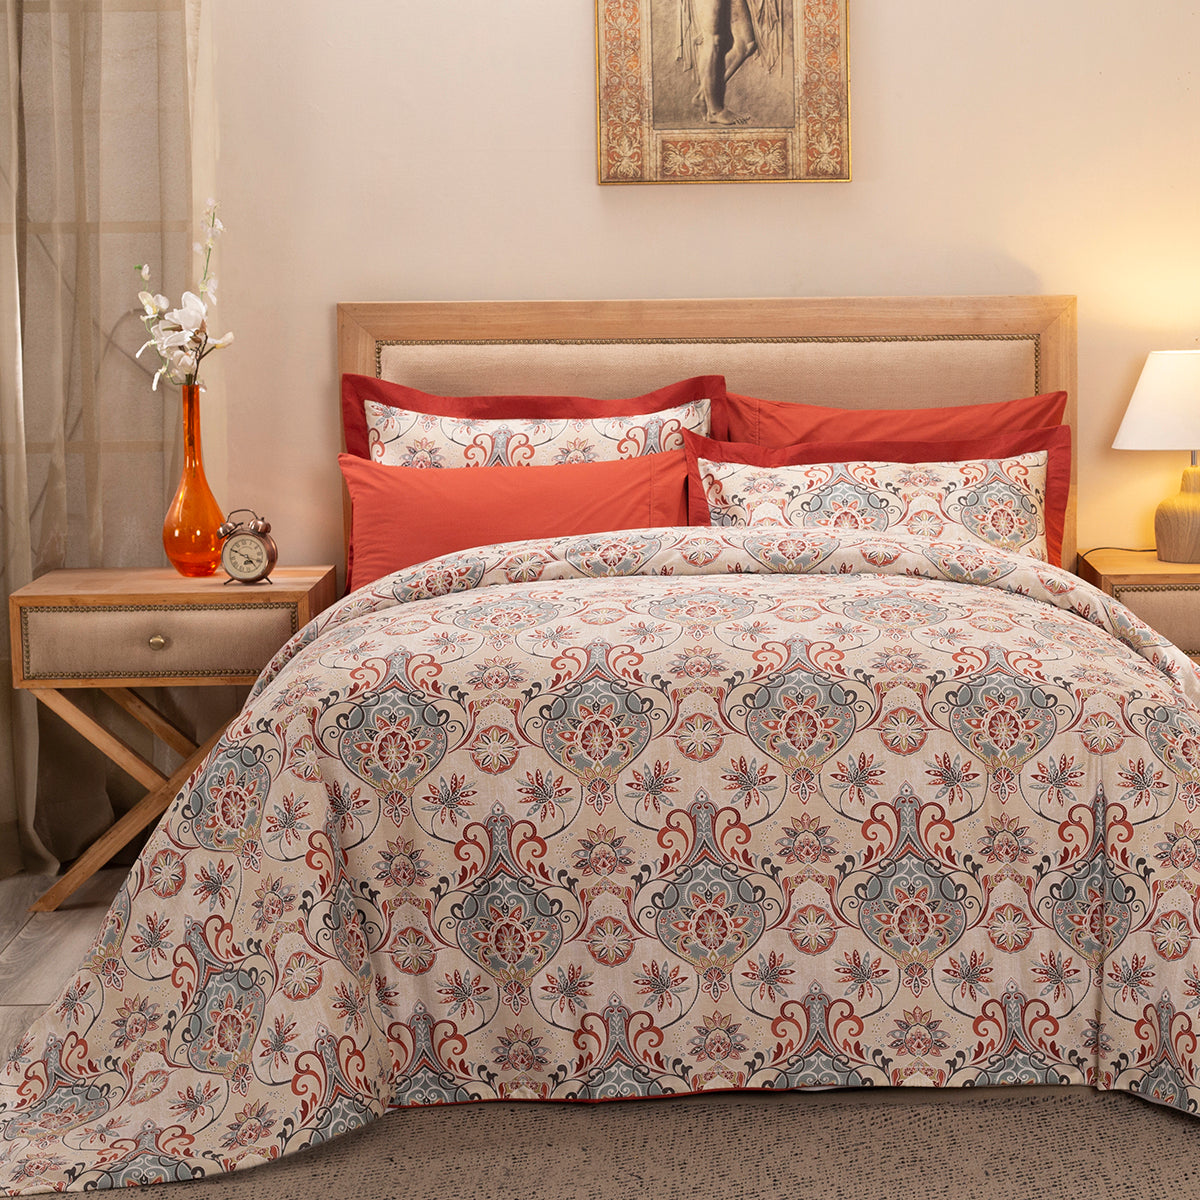 Nouveau Tradition Lawn Rerun Red Duvet Cover with Pillow Case